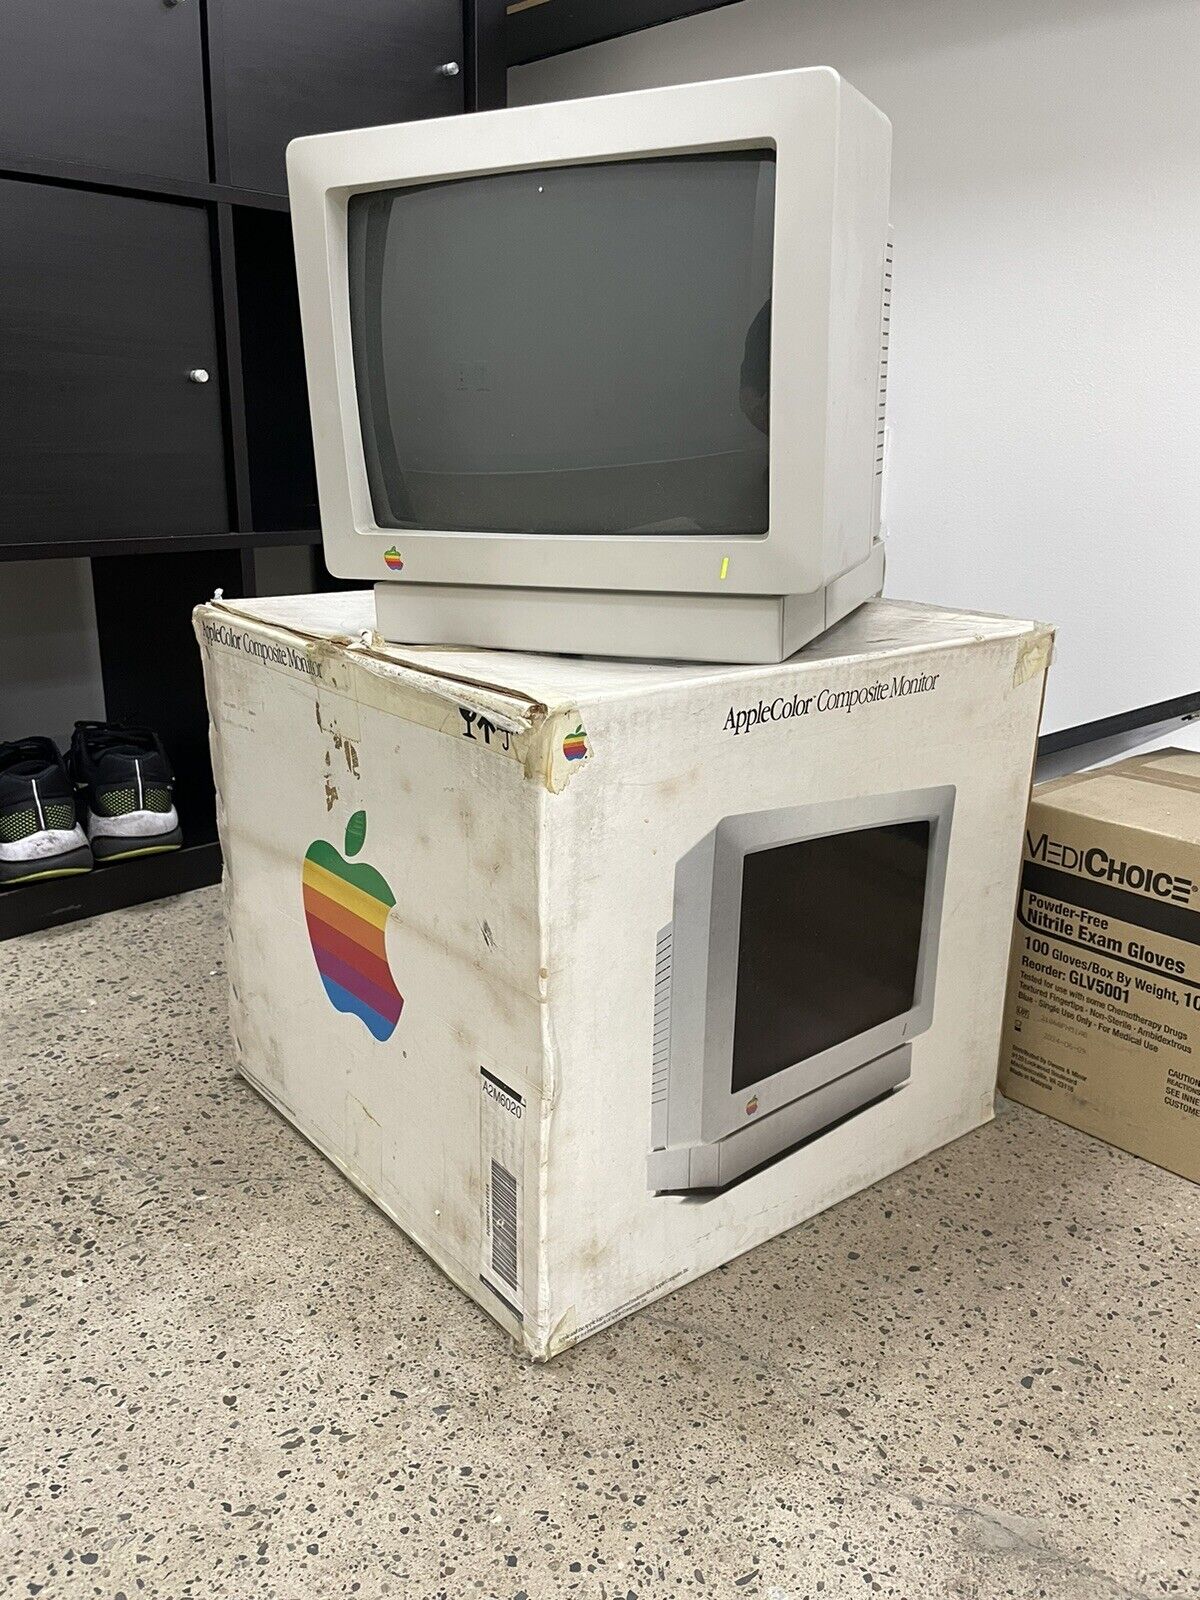 Vintage Apple IIc Color Monitor A2M4043 w/Box Parts Repair Powers on /no image